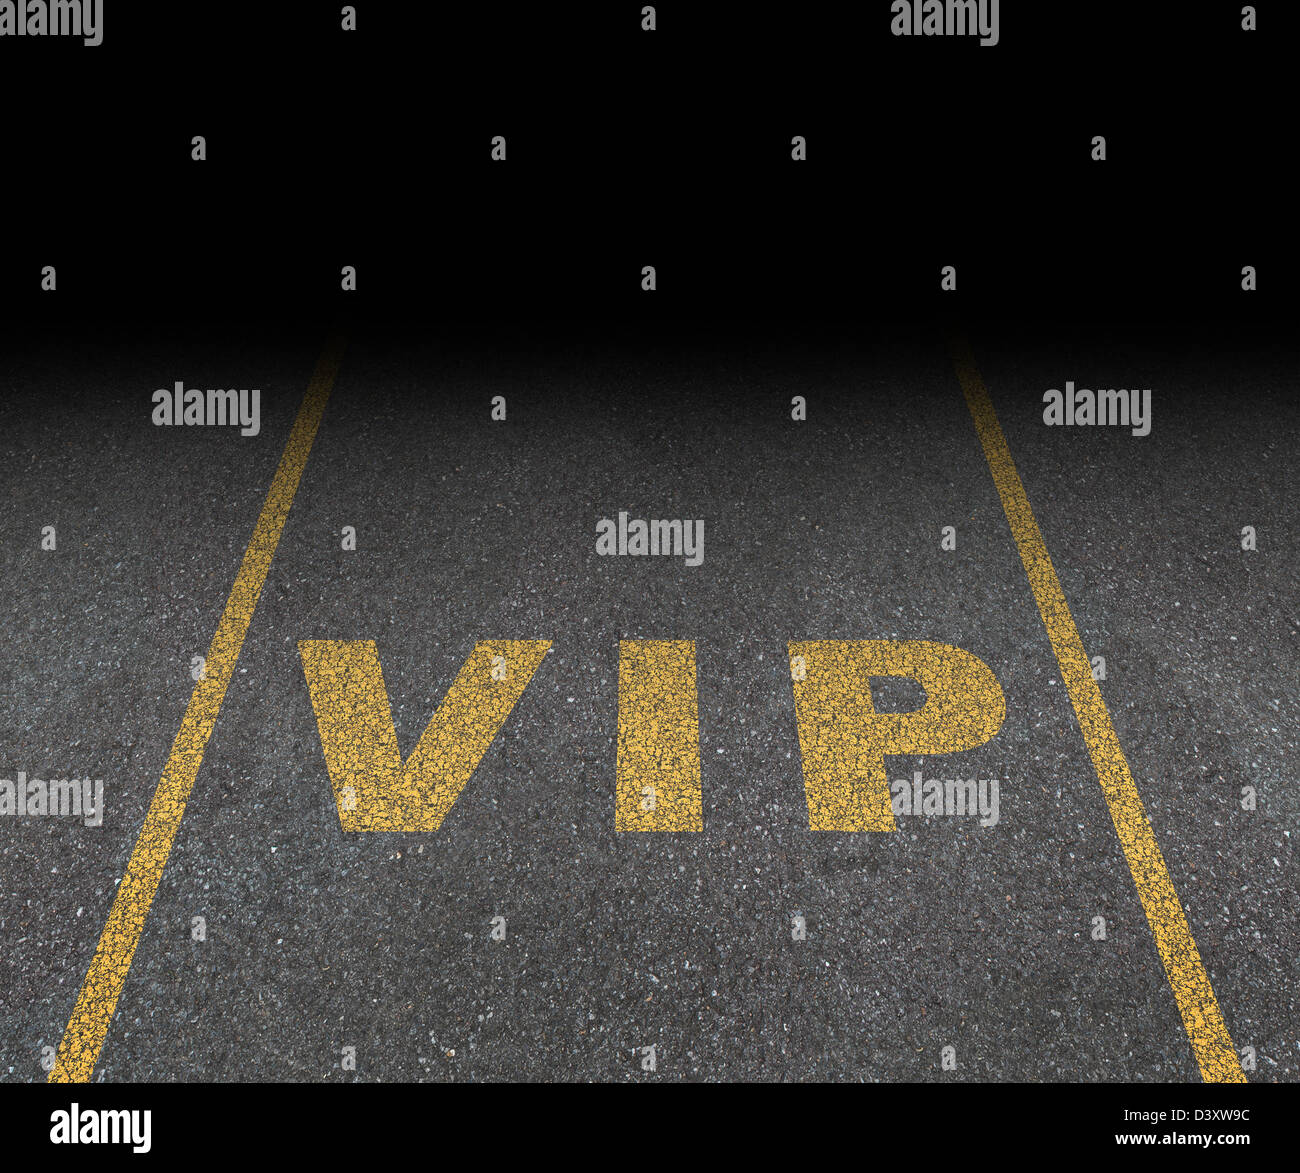 VIP service symbol with a first class reserved parking space for with a sign painted on asphalt as a symbol of exclusive hospitality with the royal treatment with a blank area for text. Stock Photo